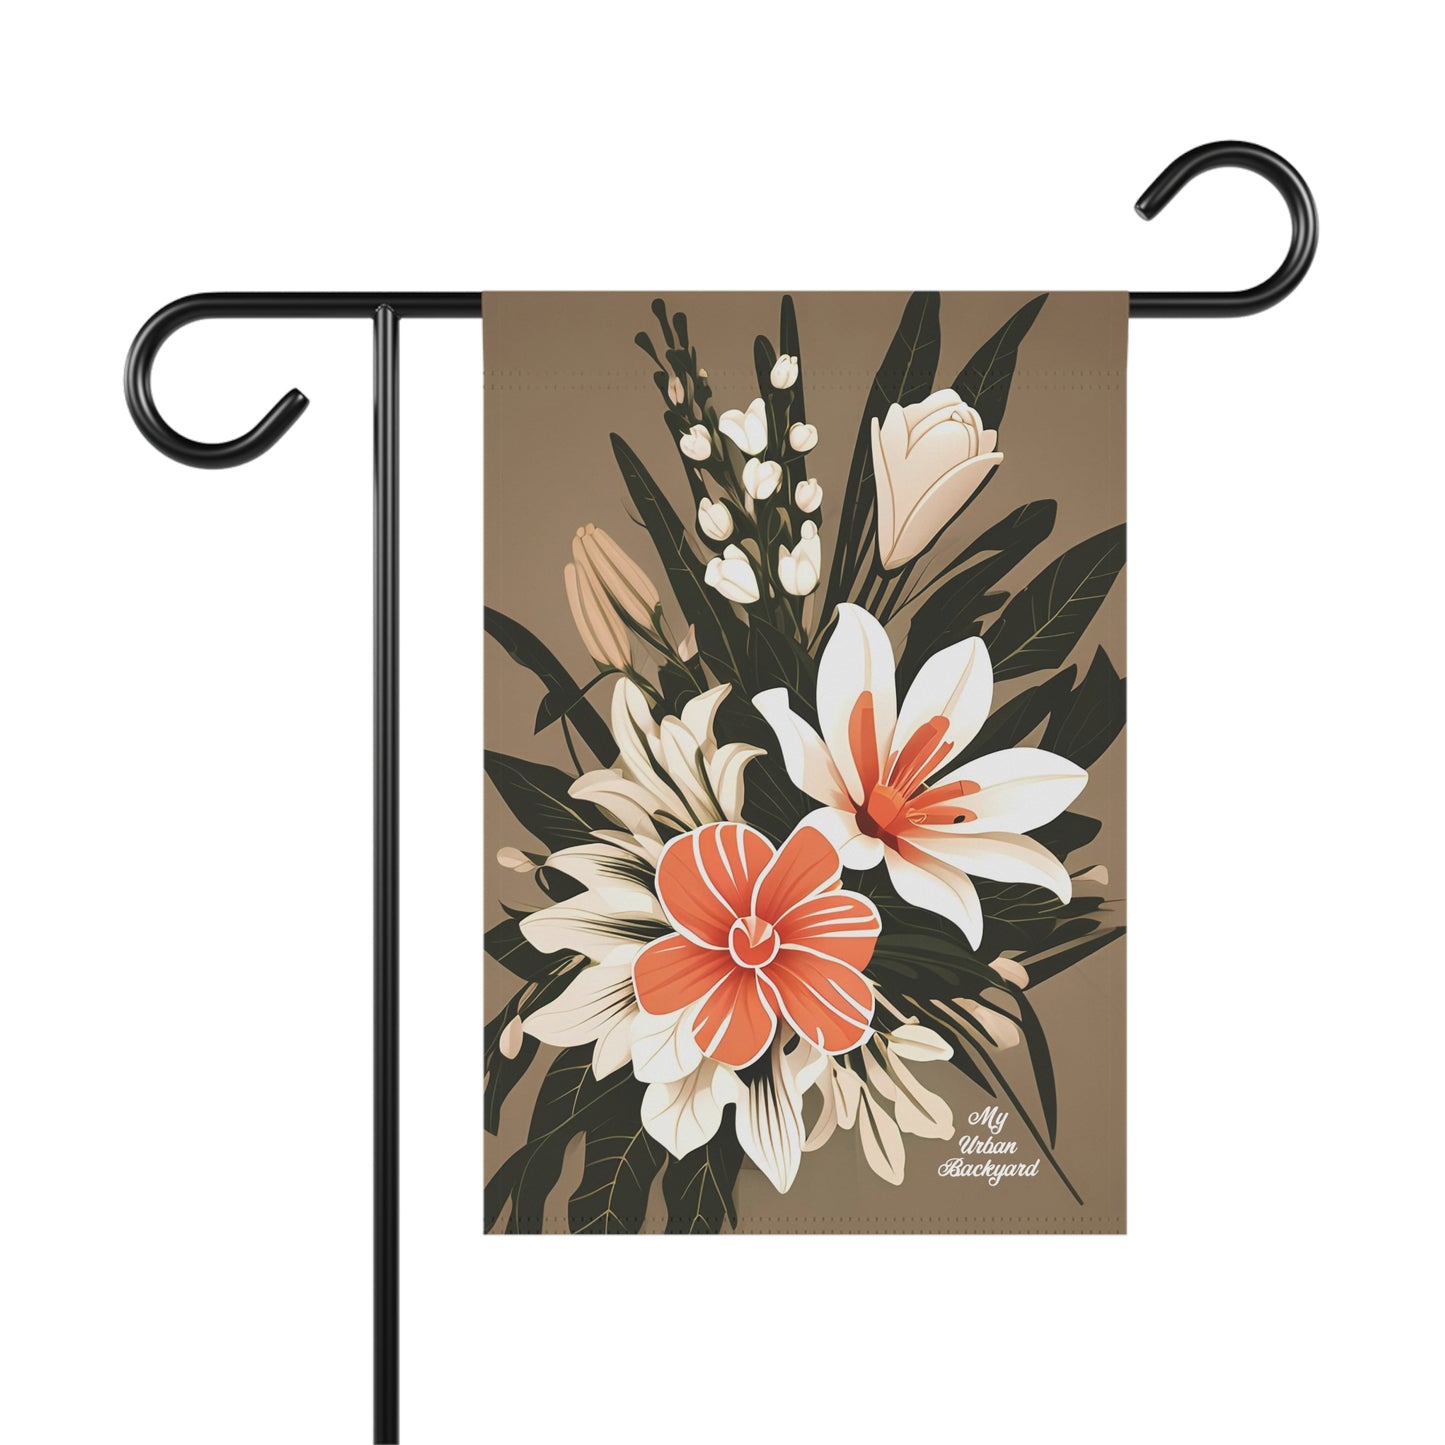 Bouquet of Flowers, Garden Flag for Yard, Patio, Porch, or Work, 12"x18" - Flag only